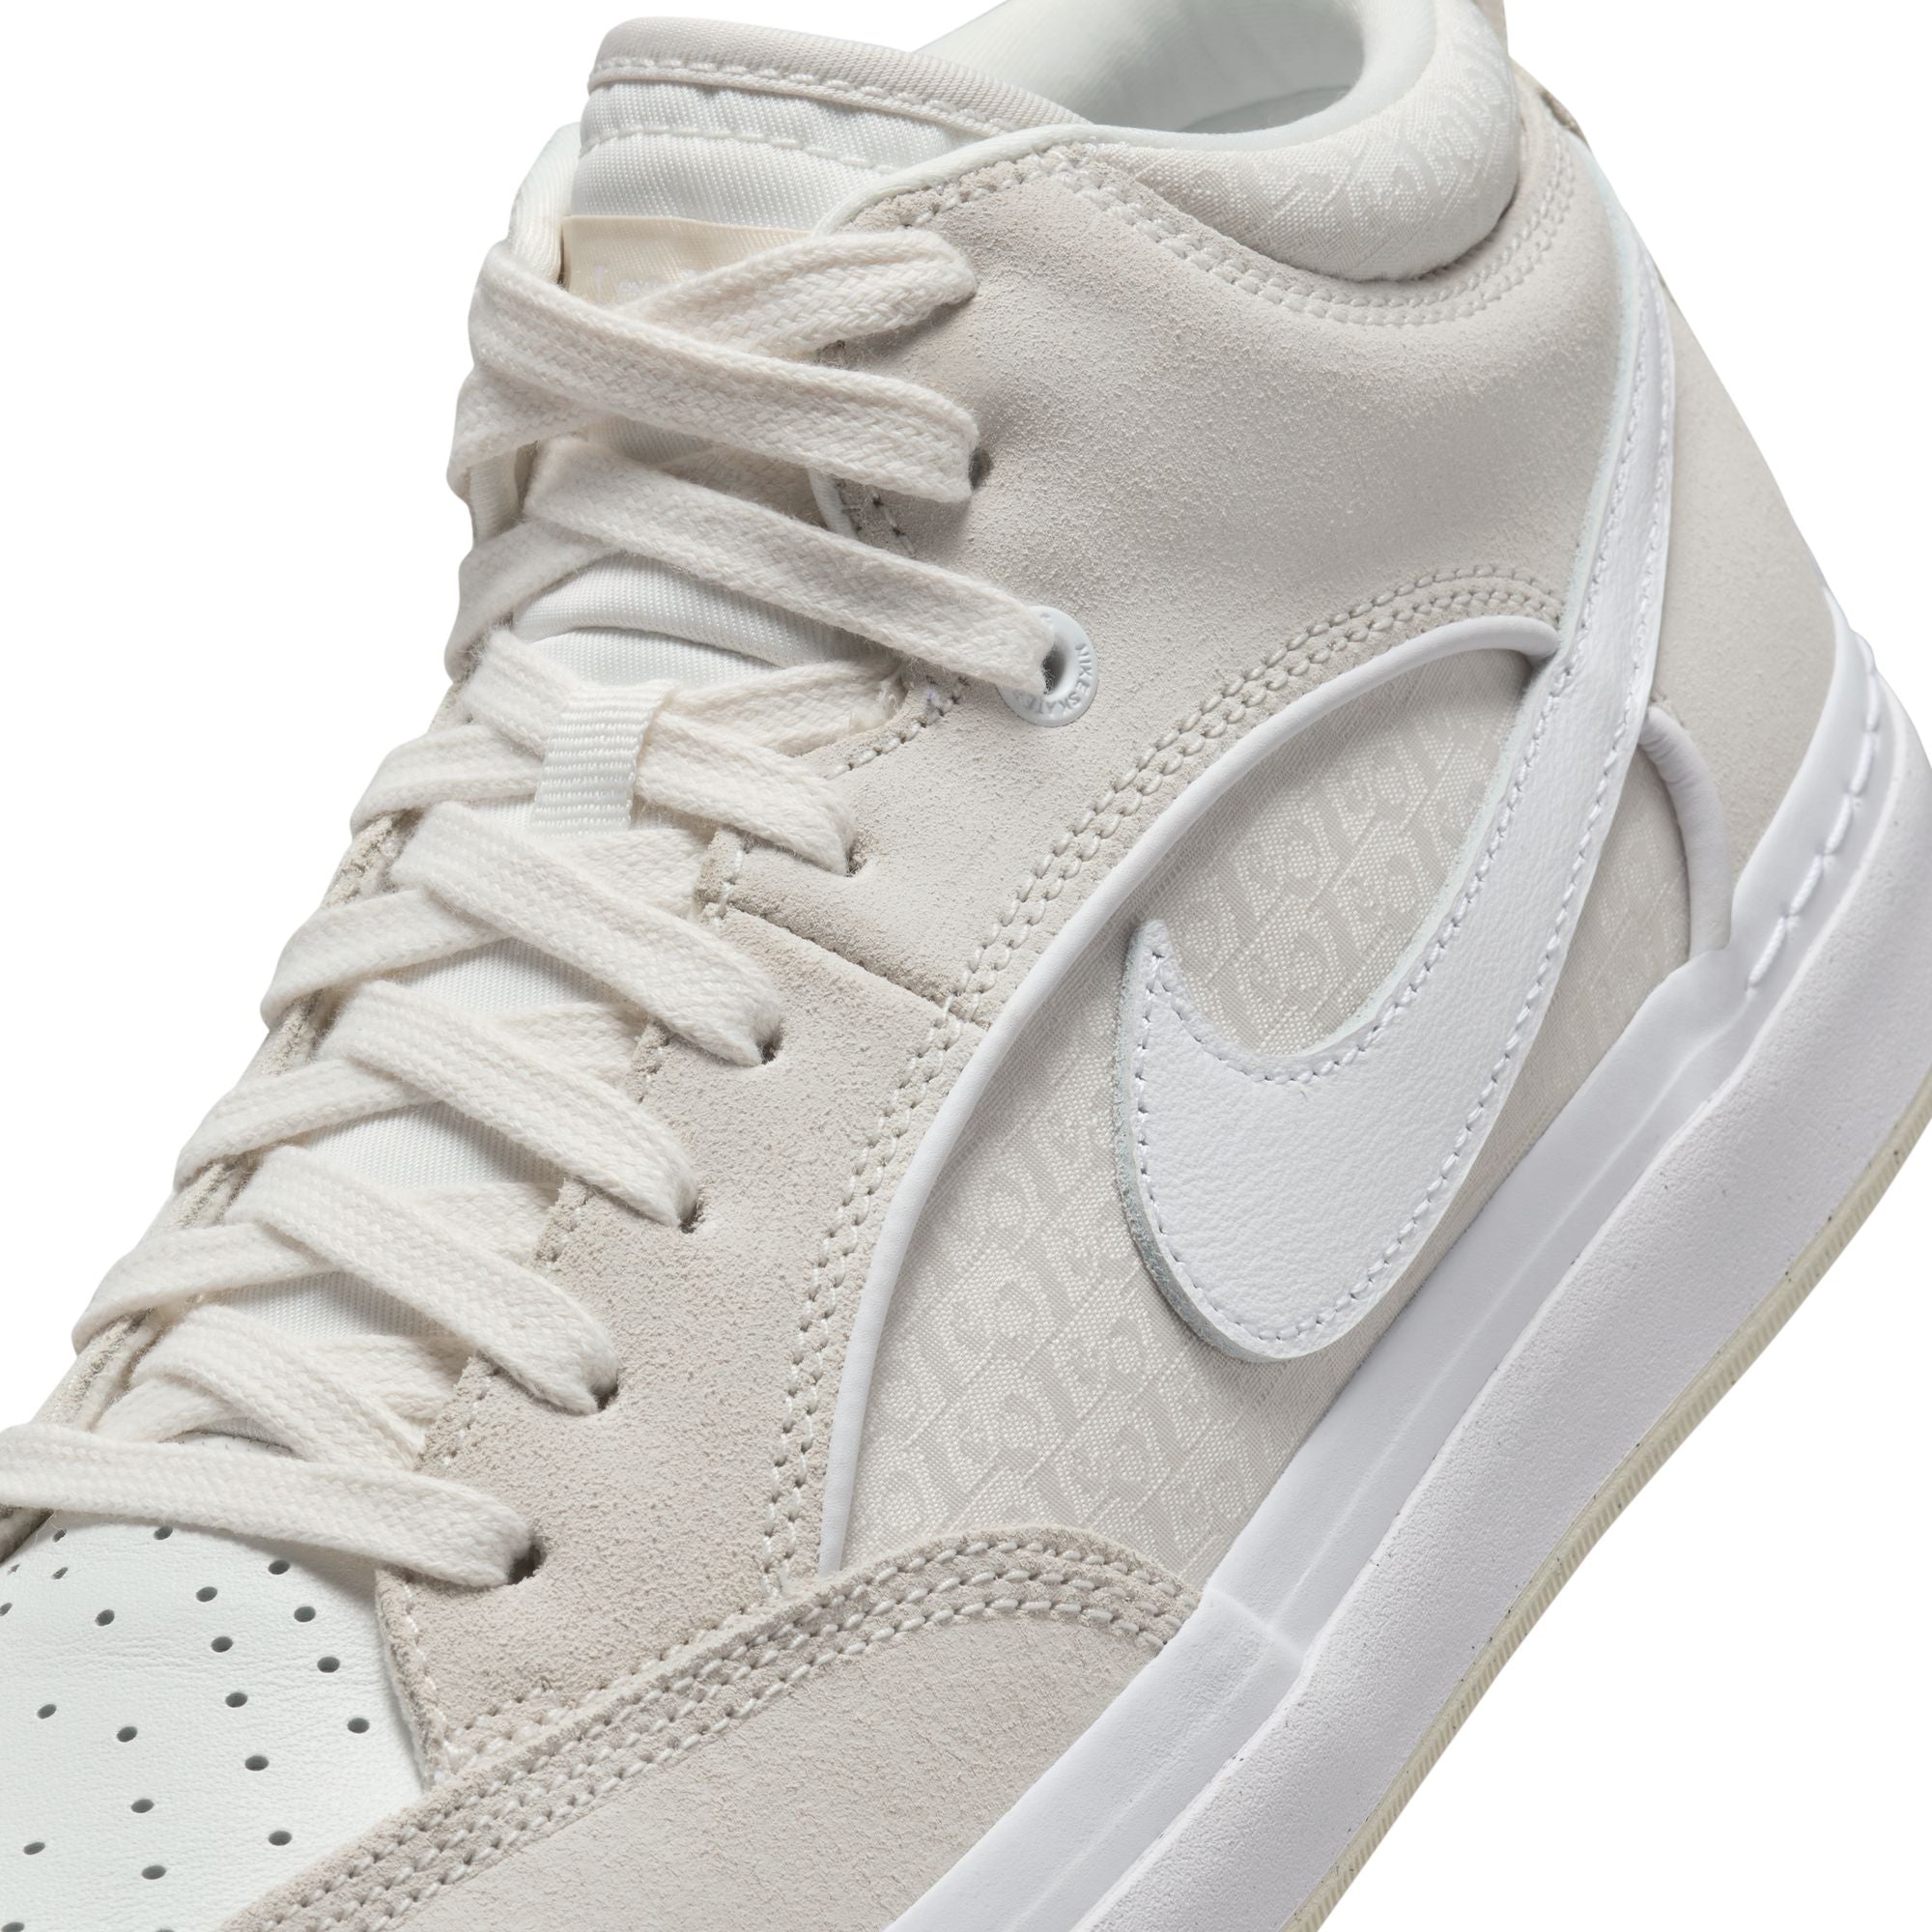 Cream white nike sb Leo Baker react mid top shoes with cream soles and white and cream details. Free uk shipping over £50